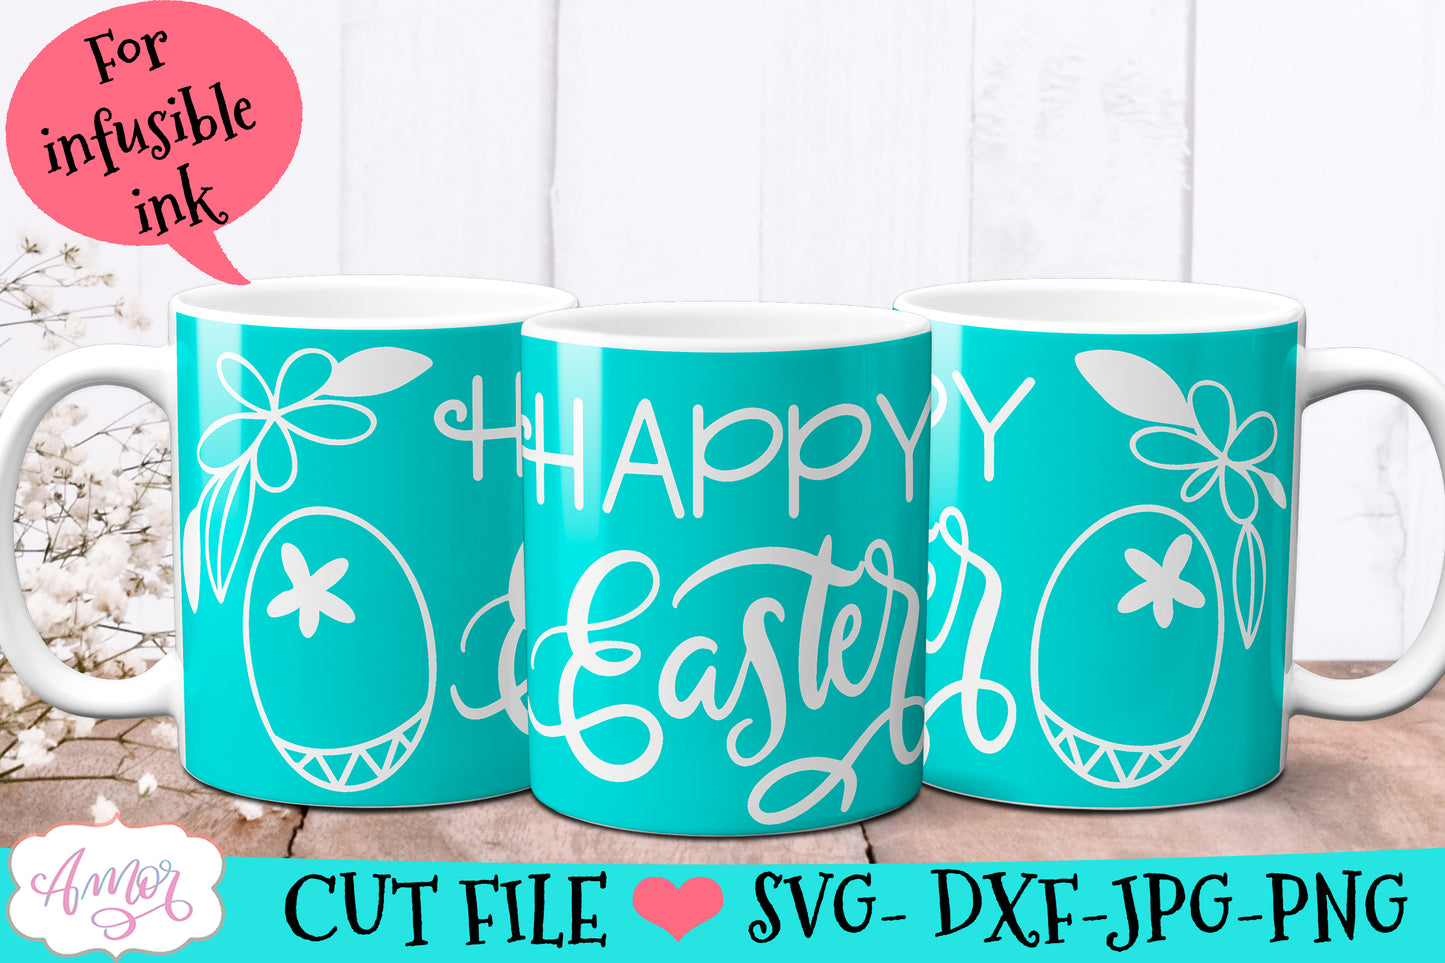 Happy Easter Mug Wrap SVG for Cricut infusible ink